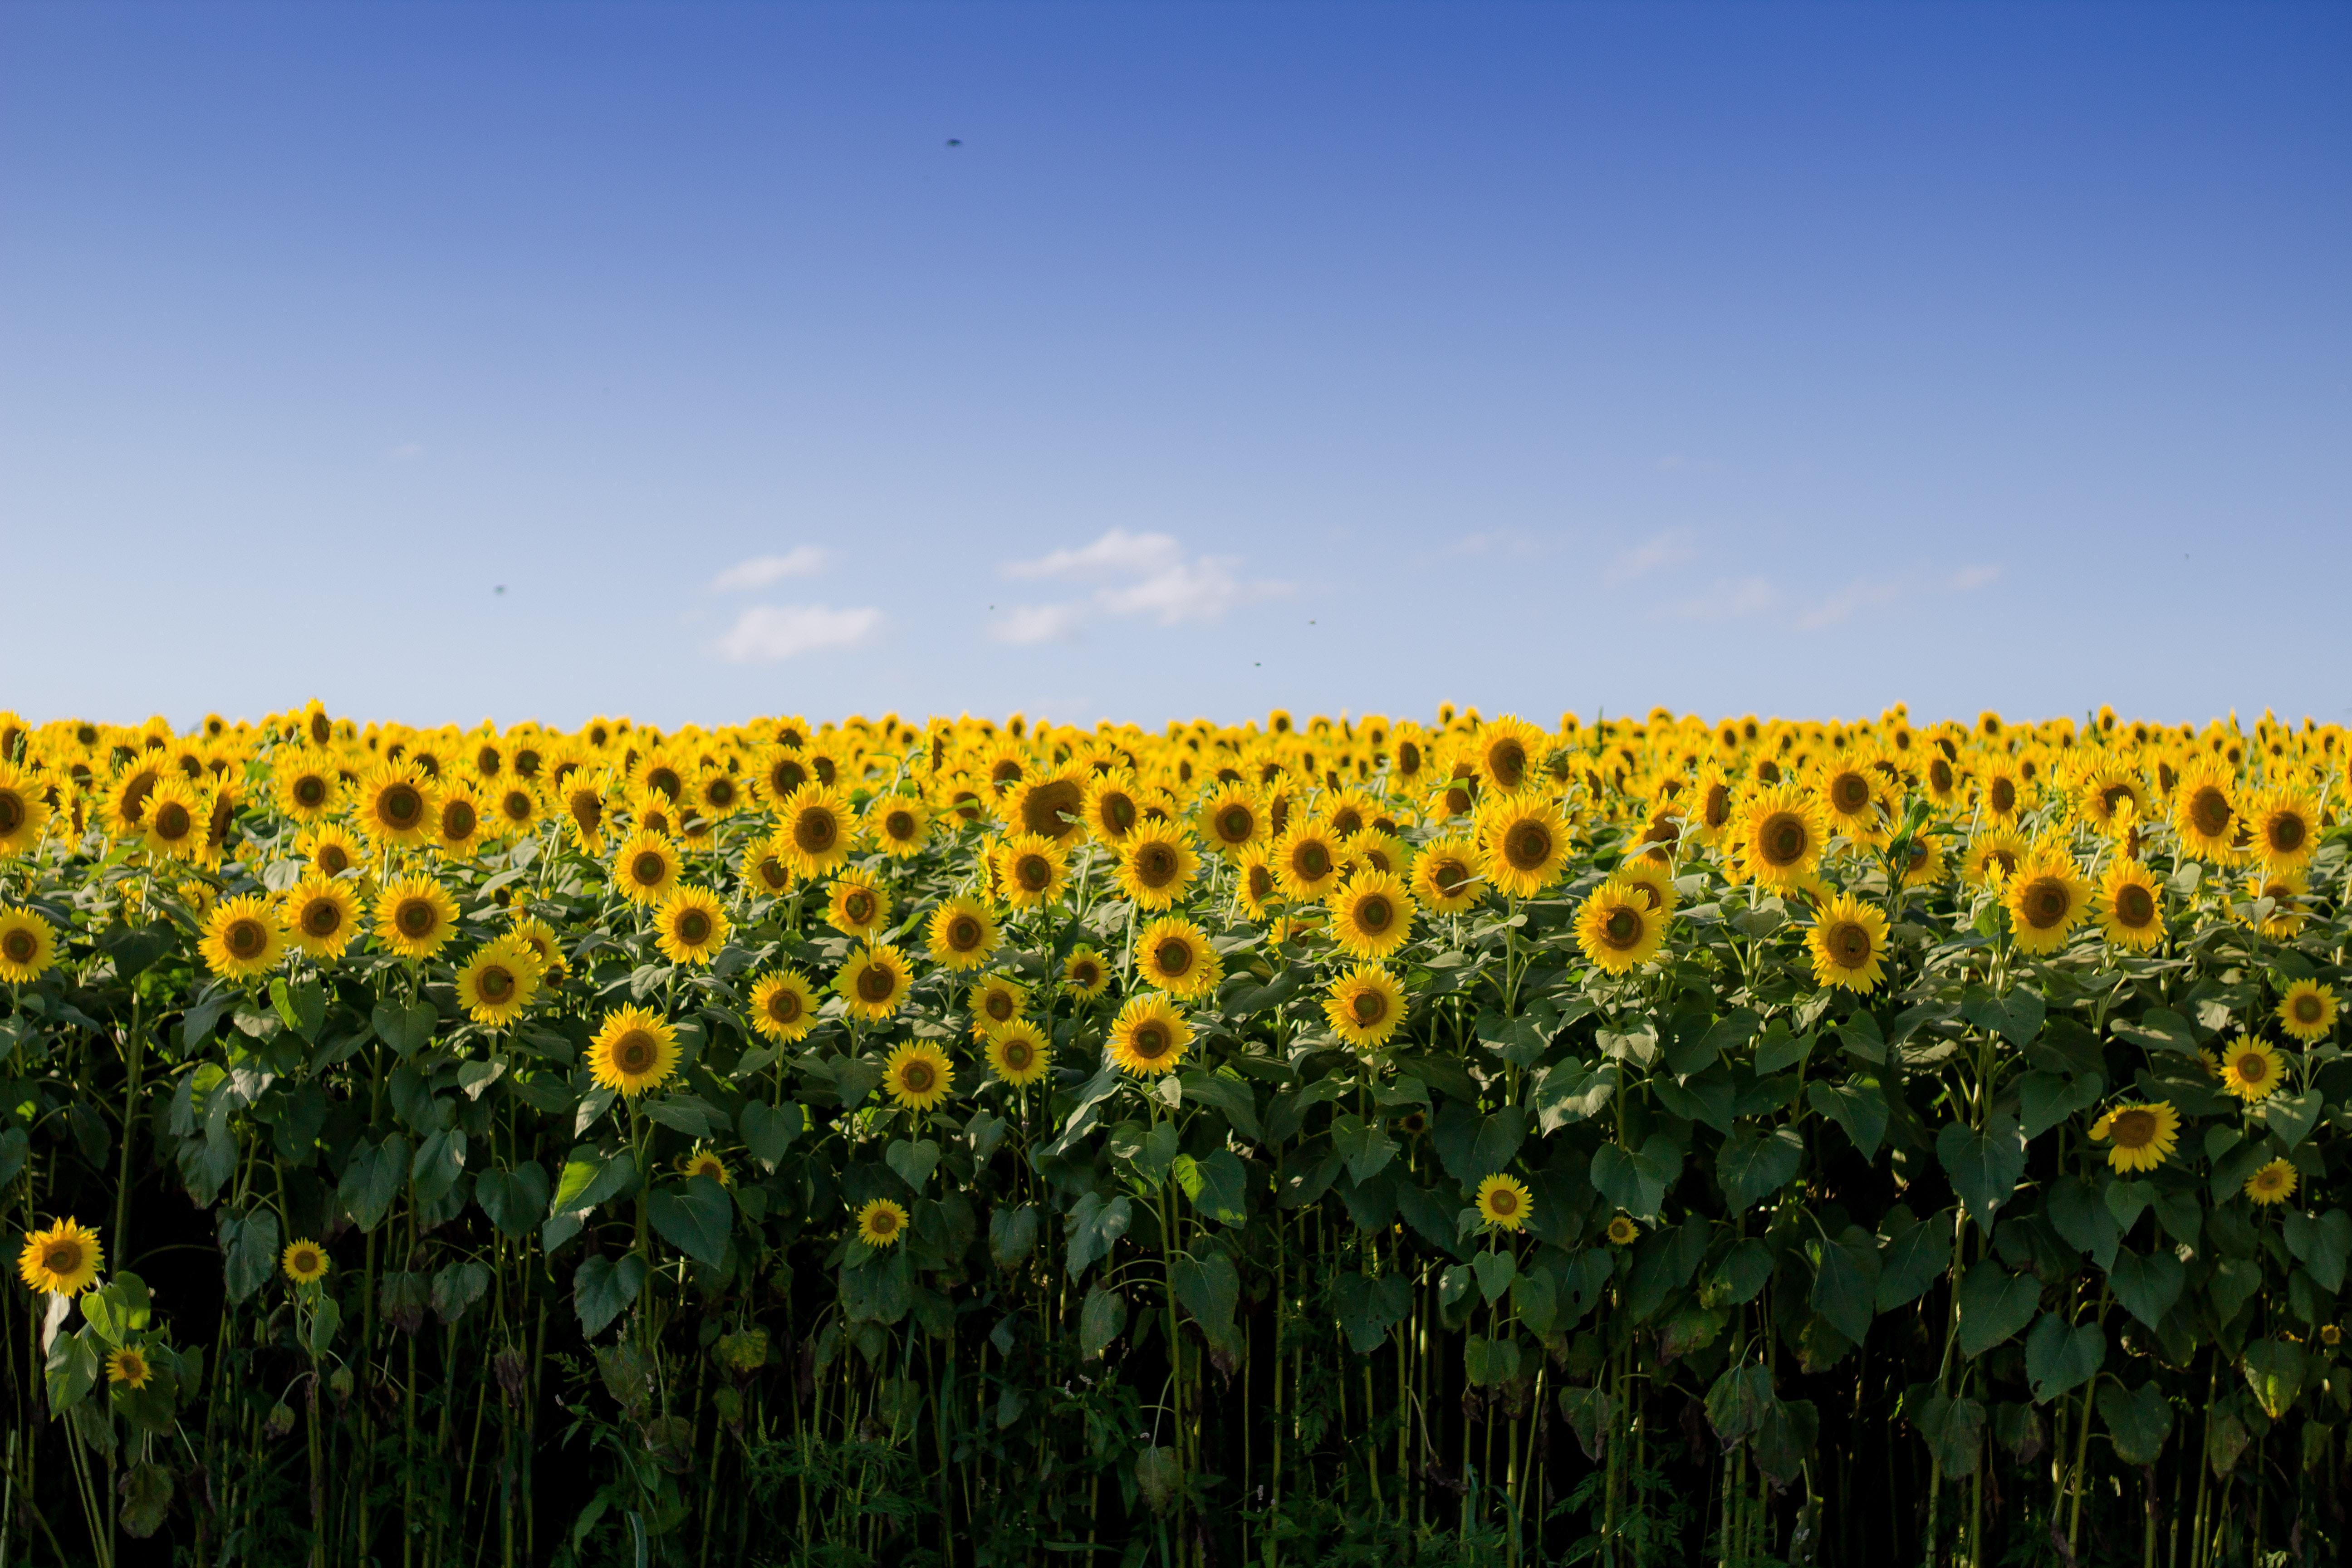 Polygon Under Accidental Attack From Swarm of Sunflower Farmers